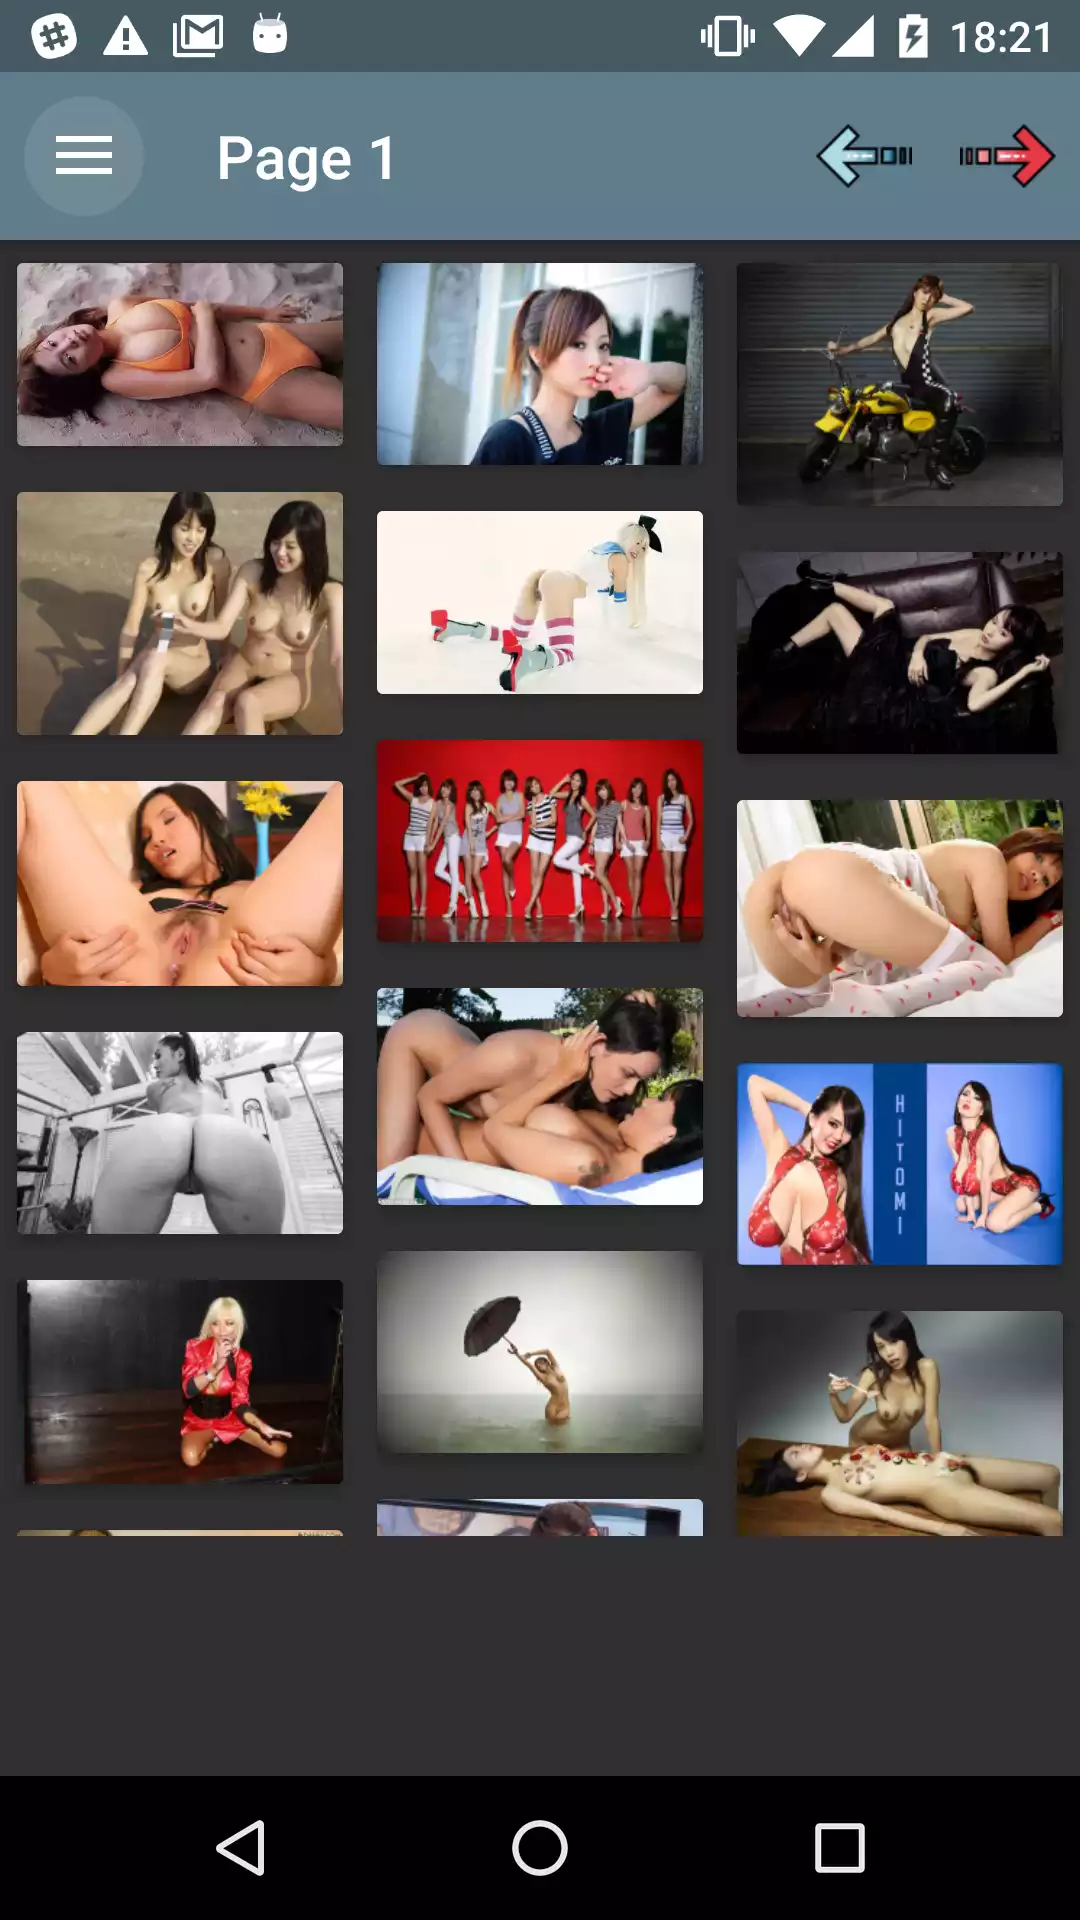 New Asian Wallpapers sexy,search,photos,new,pic,backgrounds,hentai,hotmilfpics,image,adult,apk,porn,pornstar,gallery,pics,anime,finder,wallpapers,comics,rated,android,apps,download